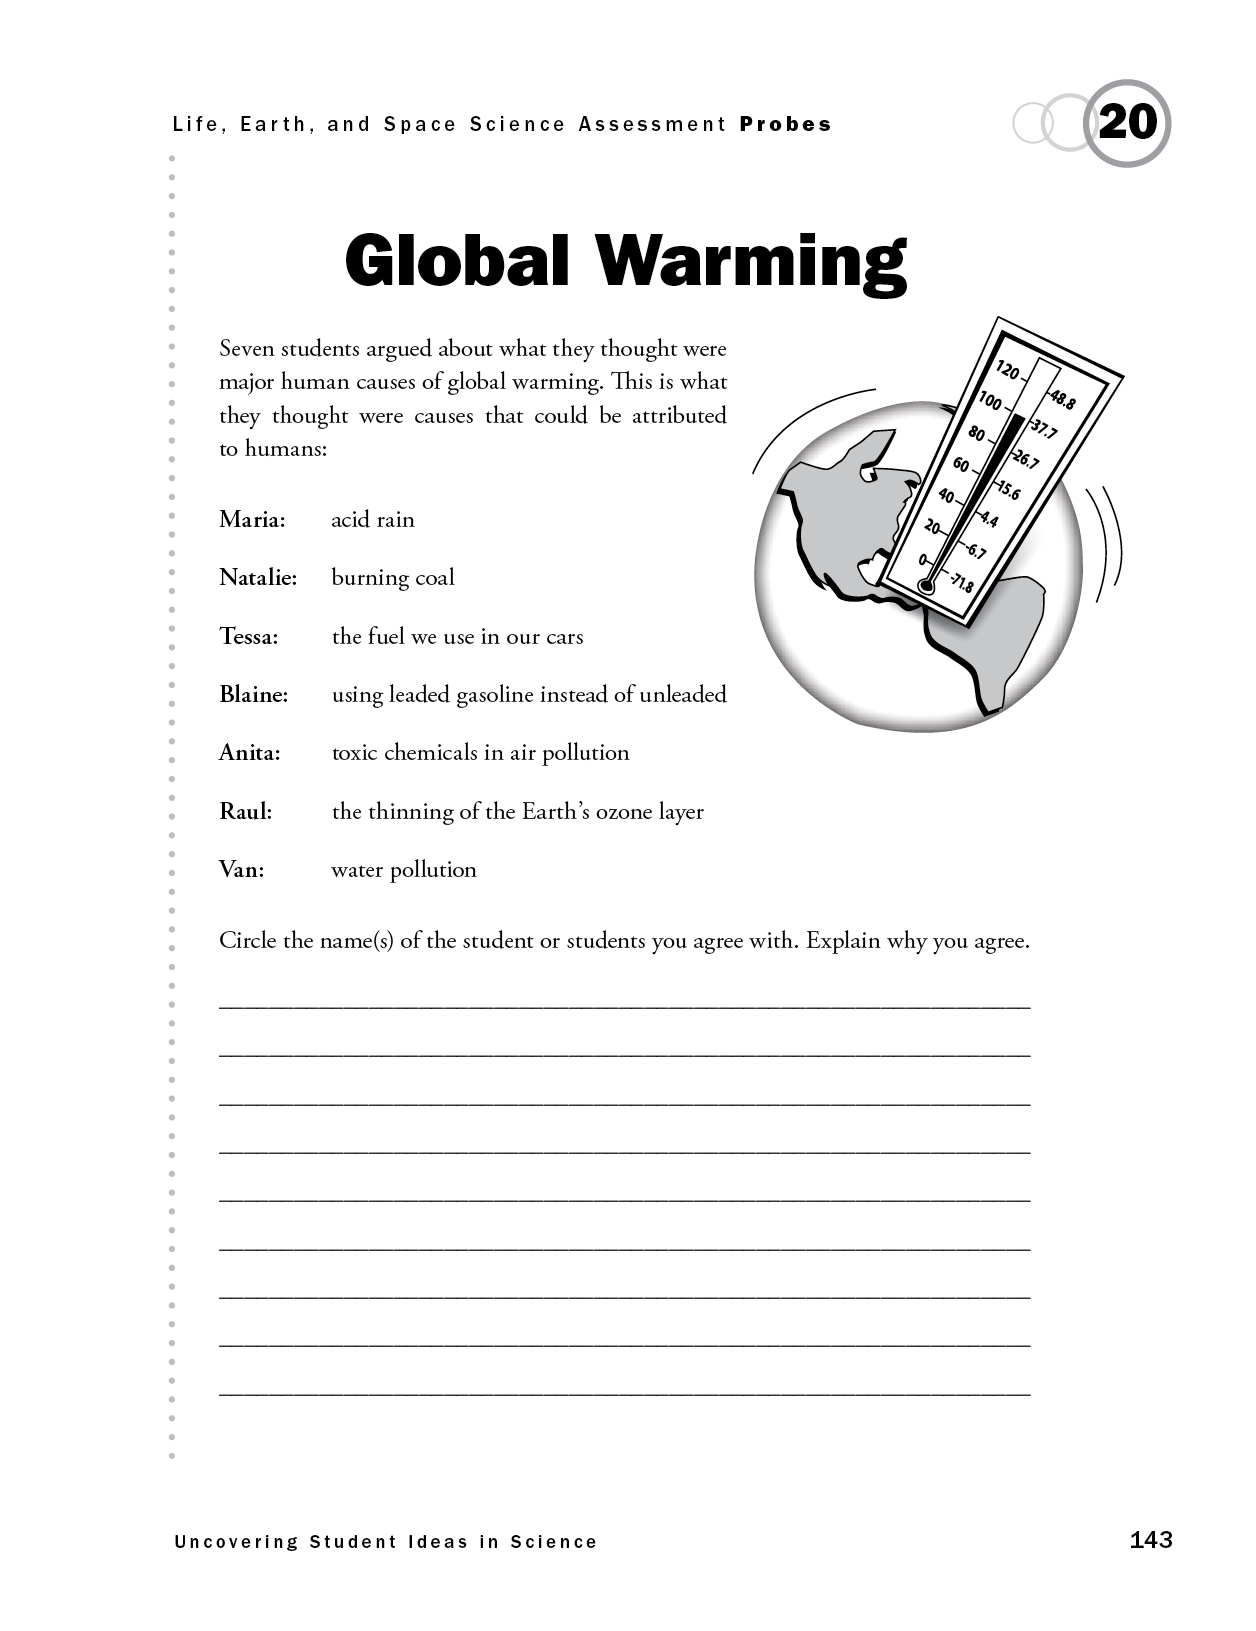 research questions global warming